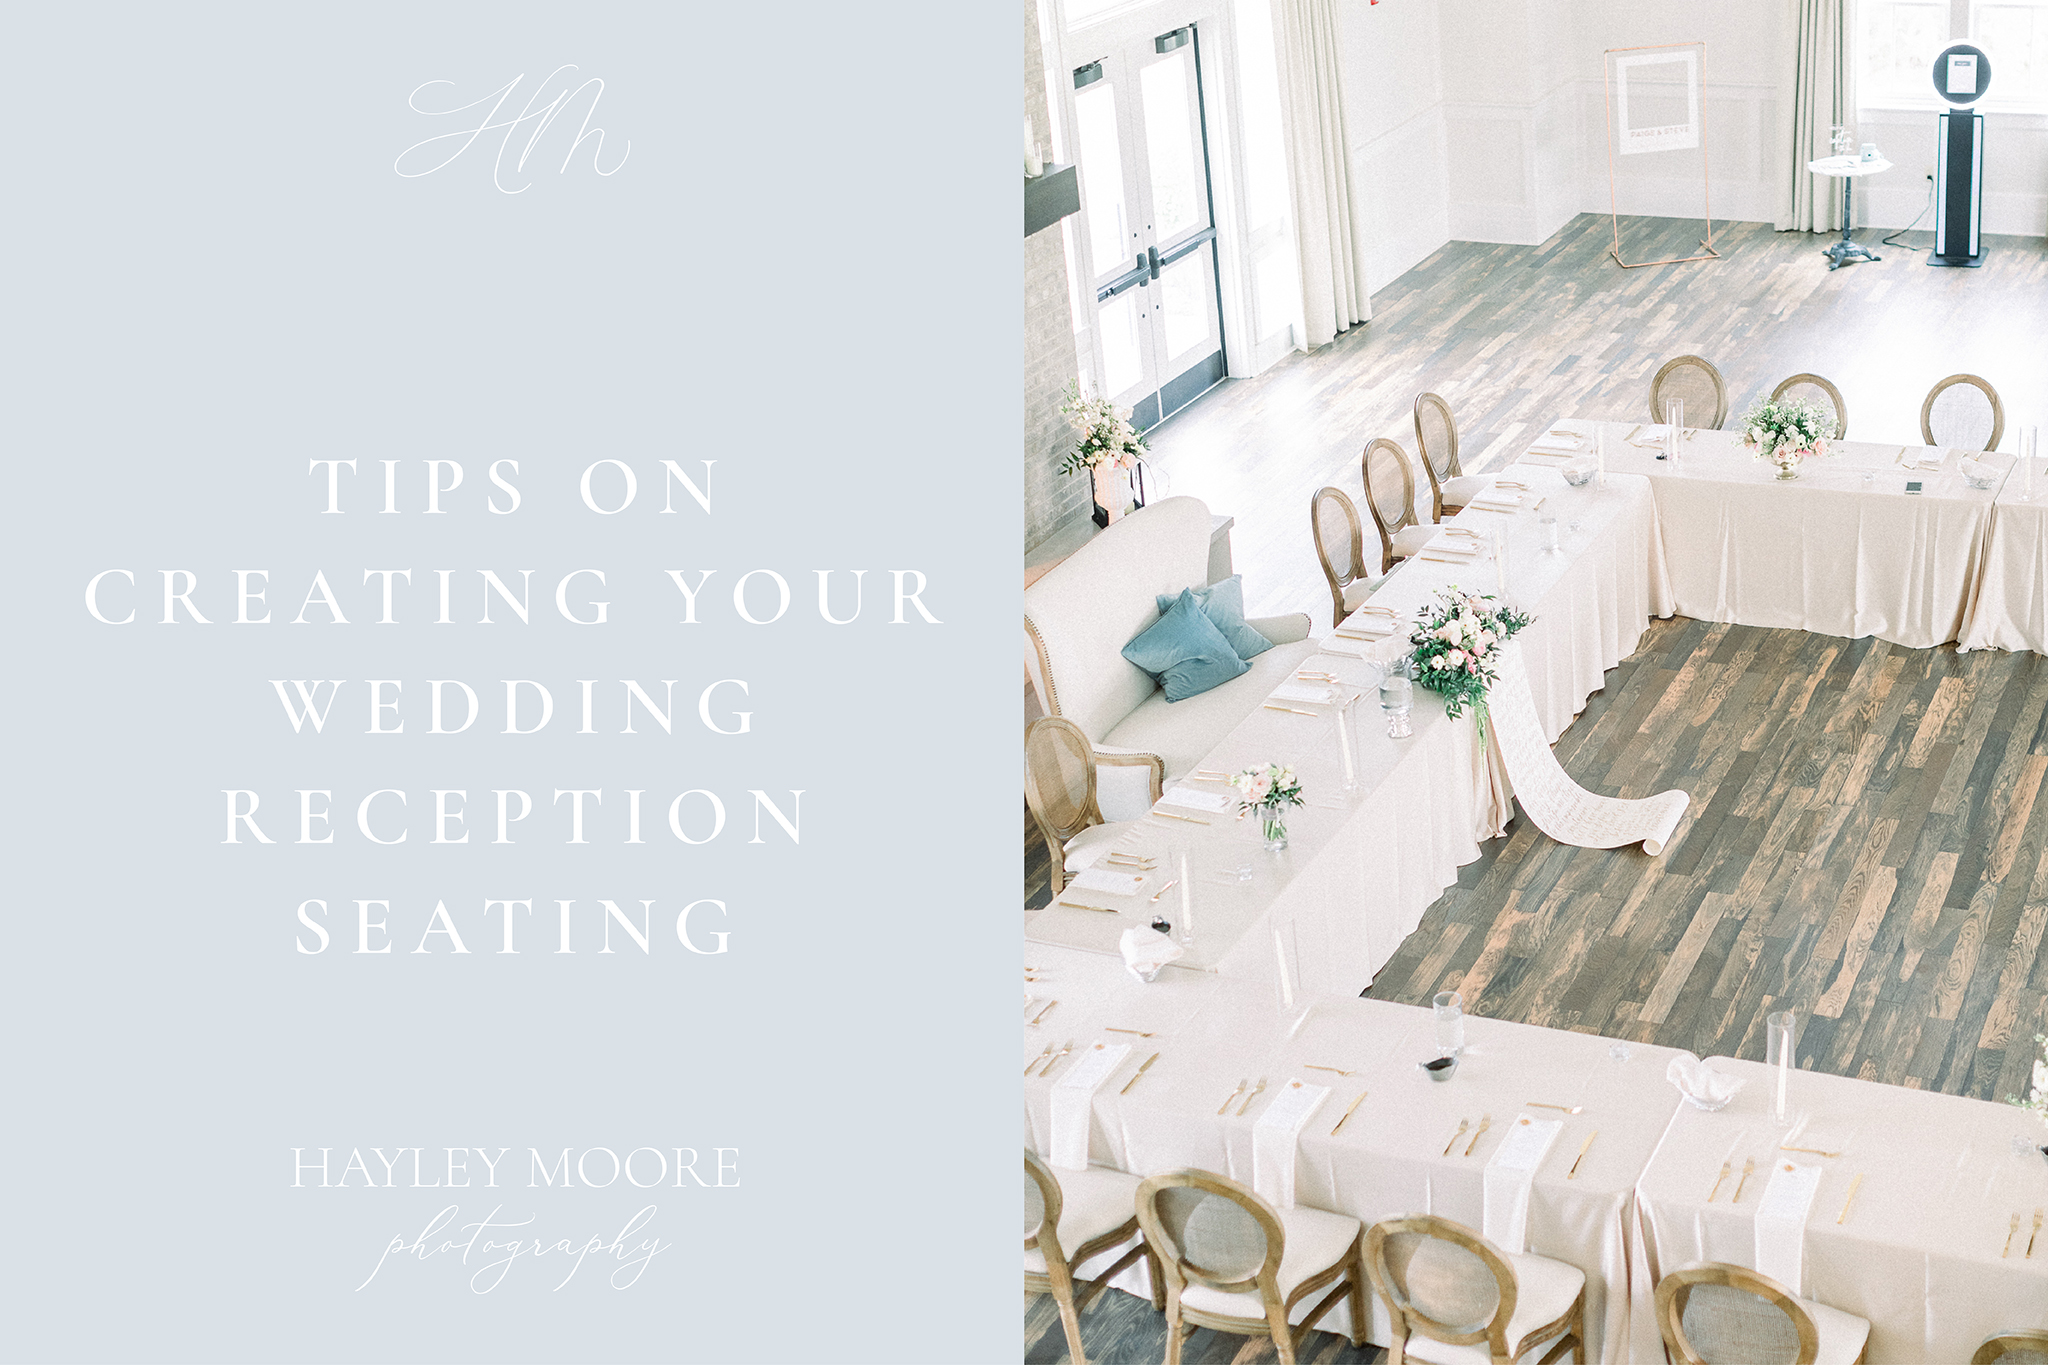 Tips on Creating Your Wedding Reception Seating